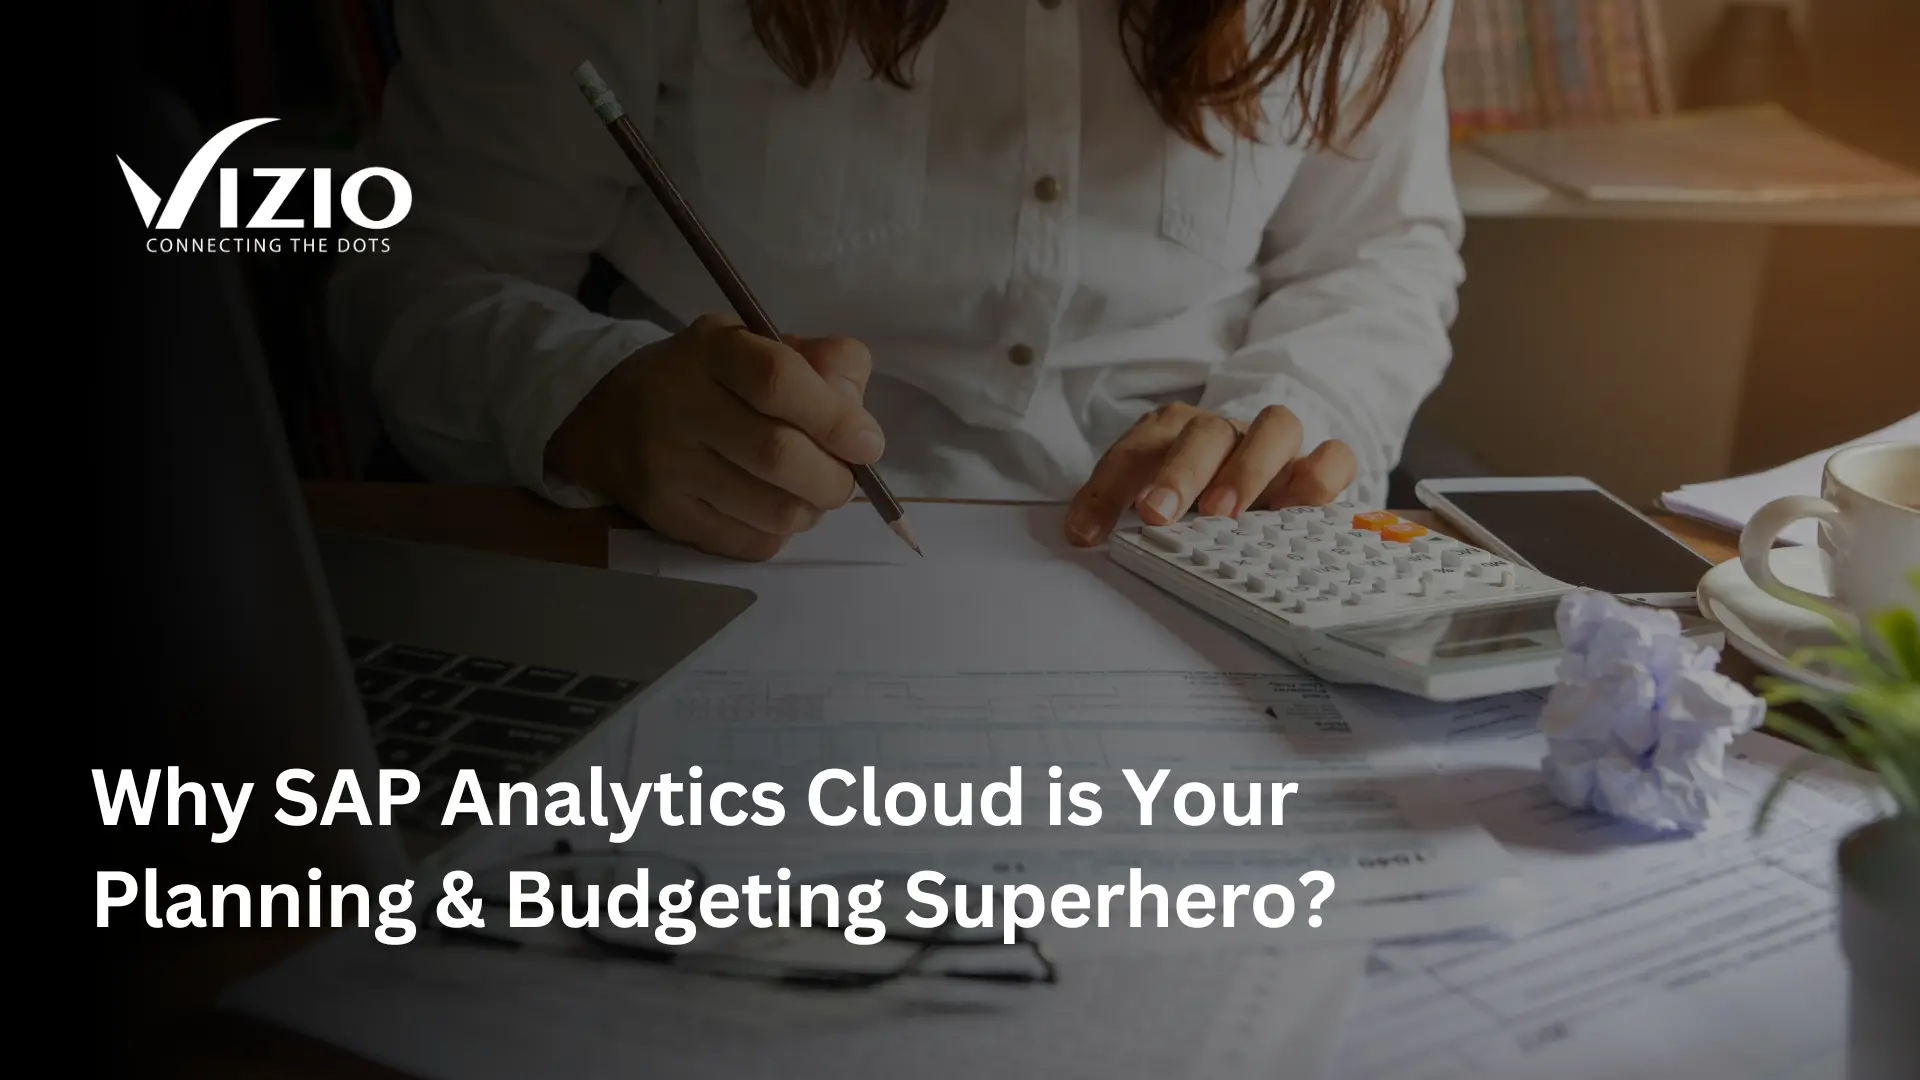 Why SAP Analytics Cloud is your Planning & Budgeting Superhero?